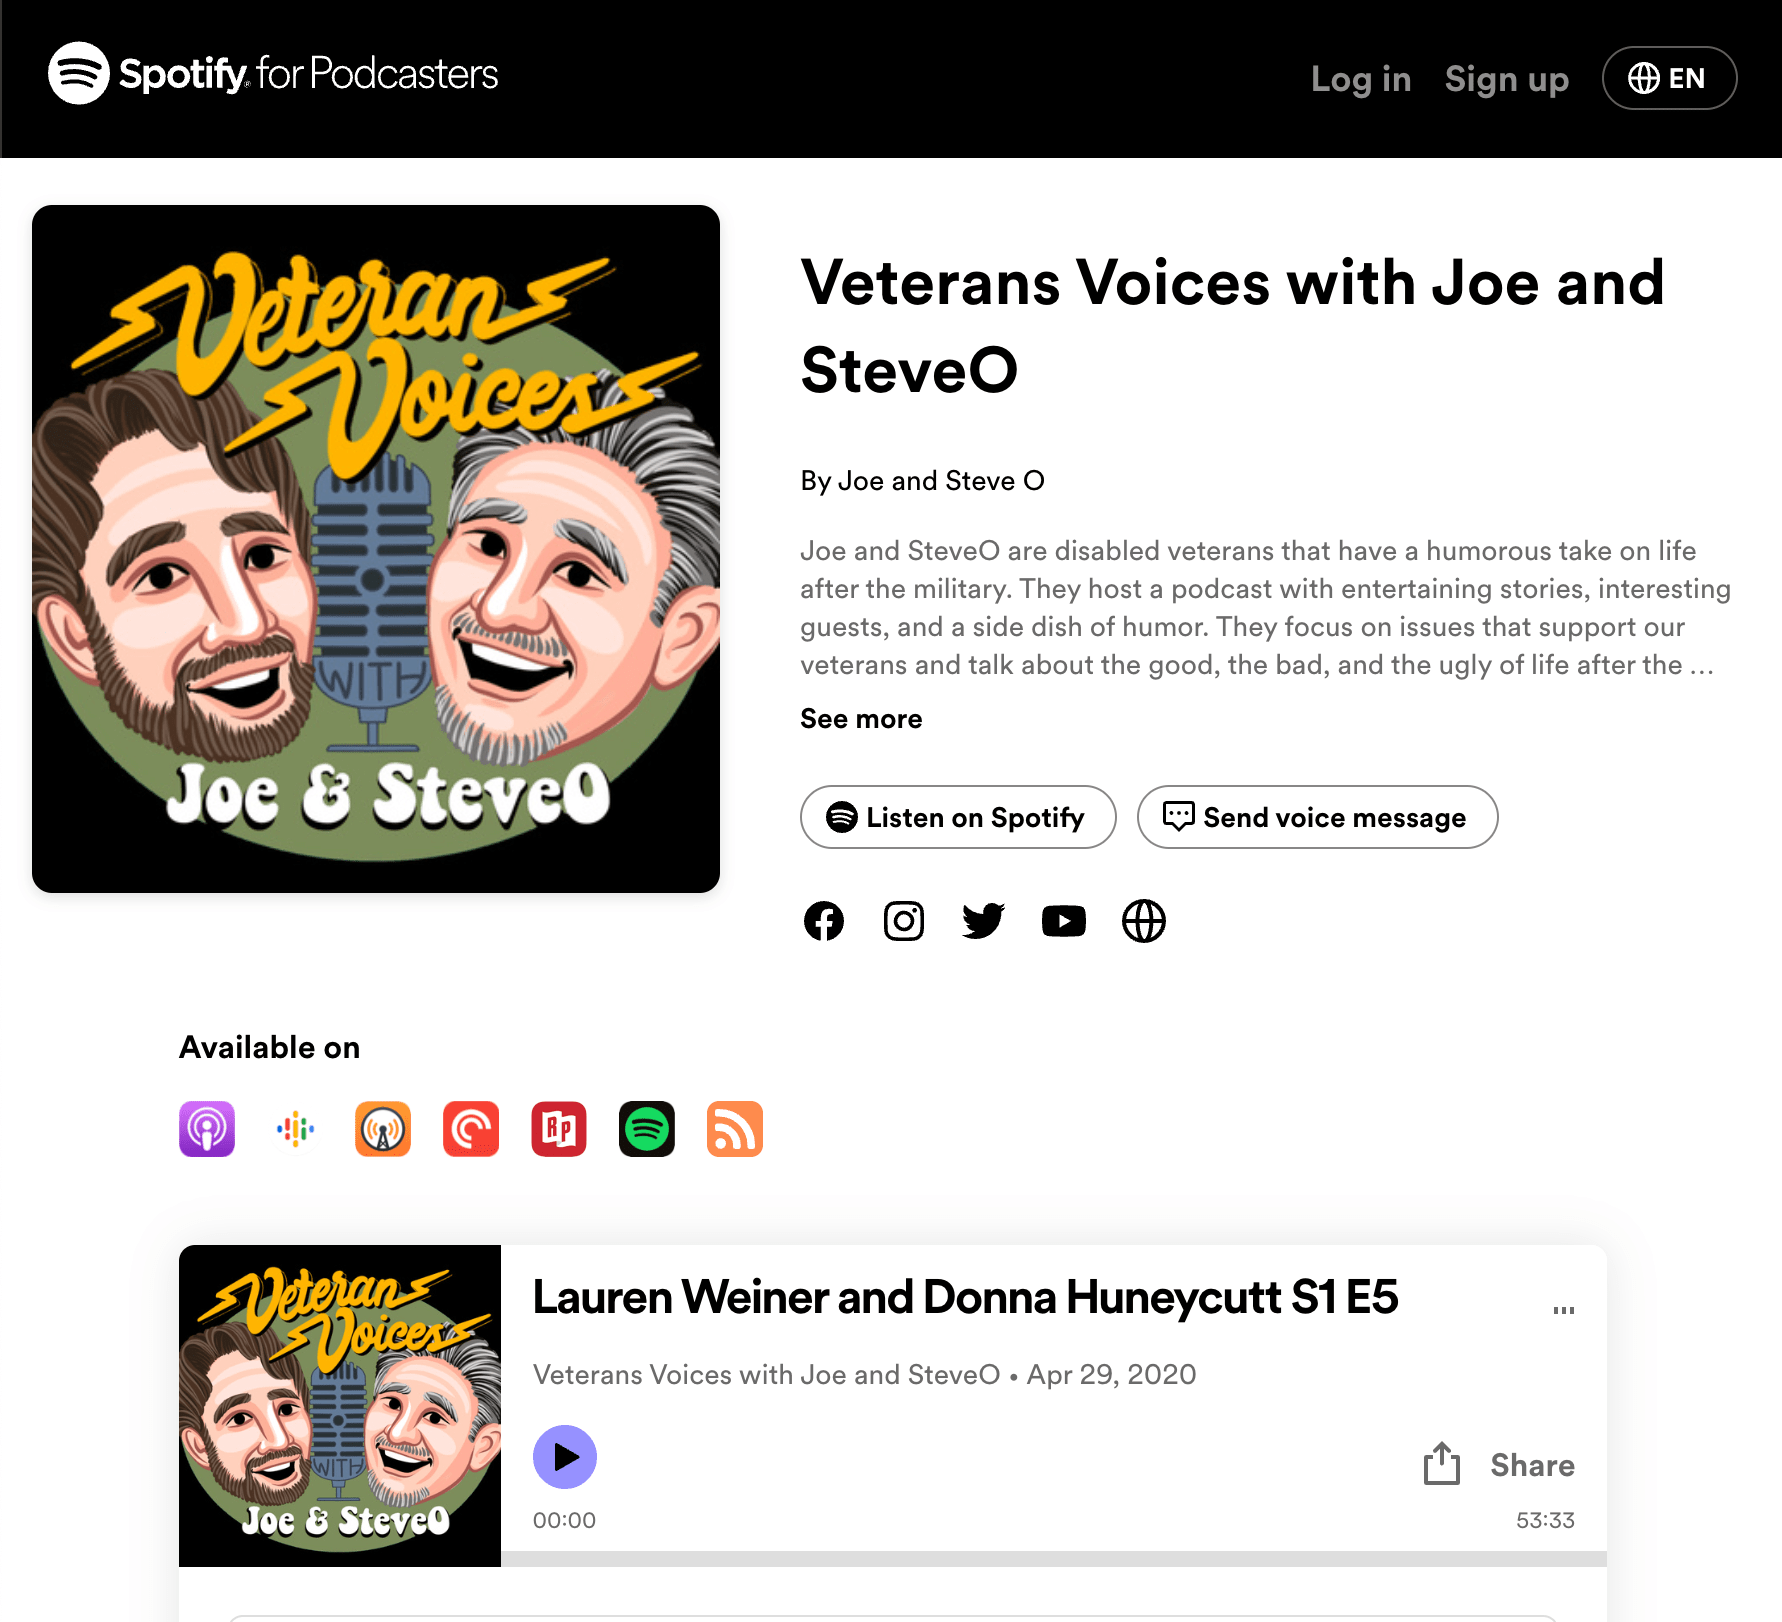 Podcast, Veterans Voices with Joe and SteveO